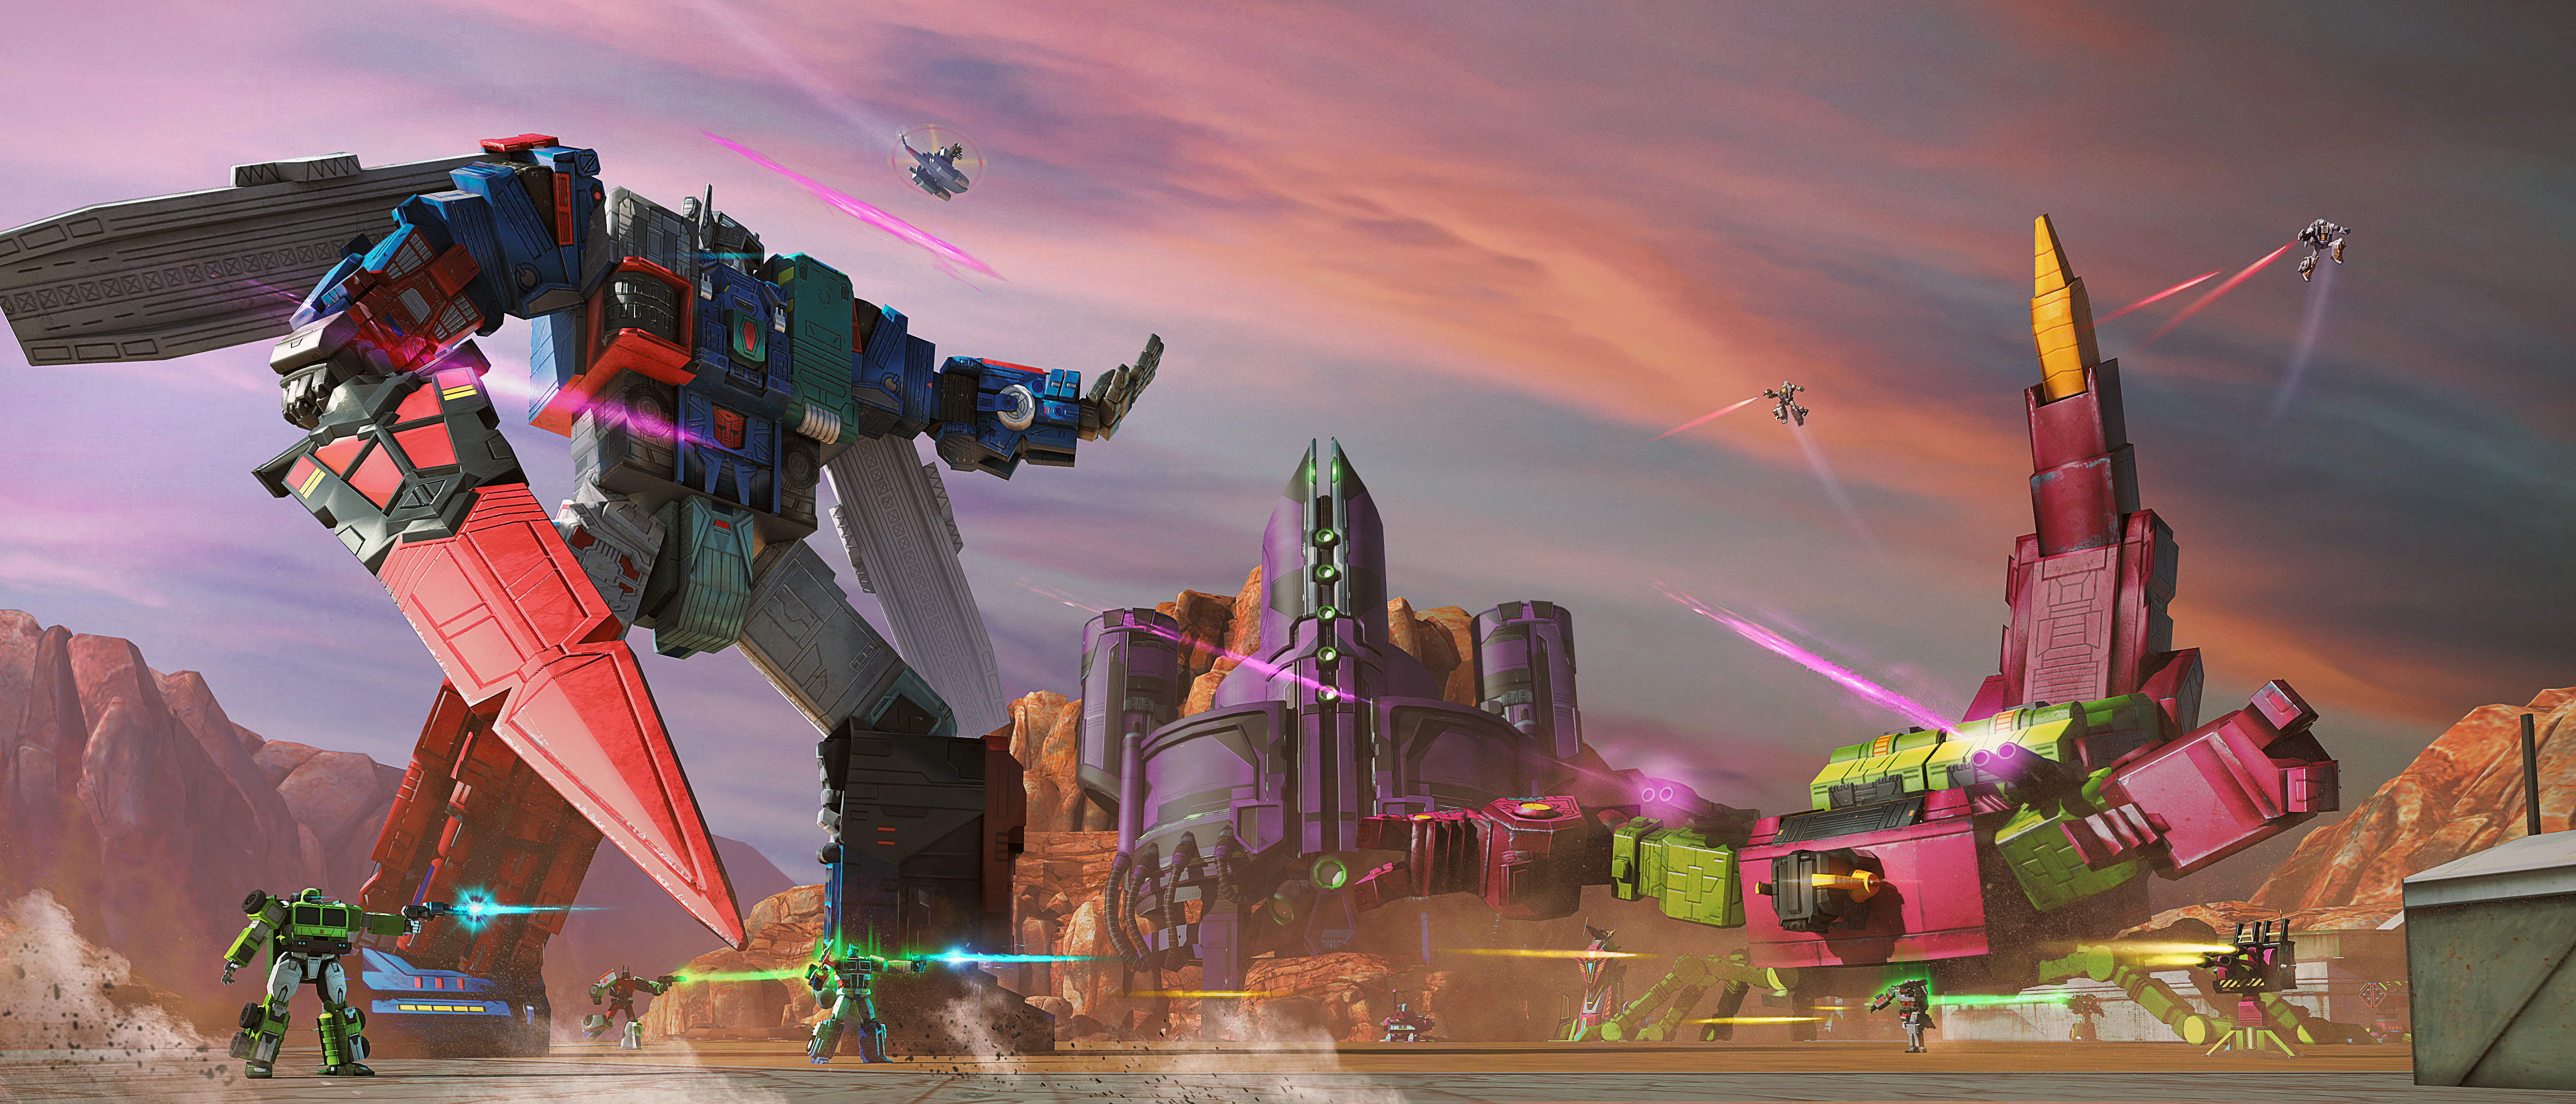 More-Titans-On-Earth-Loading-Screen-_Final-Render_-Final-2.png